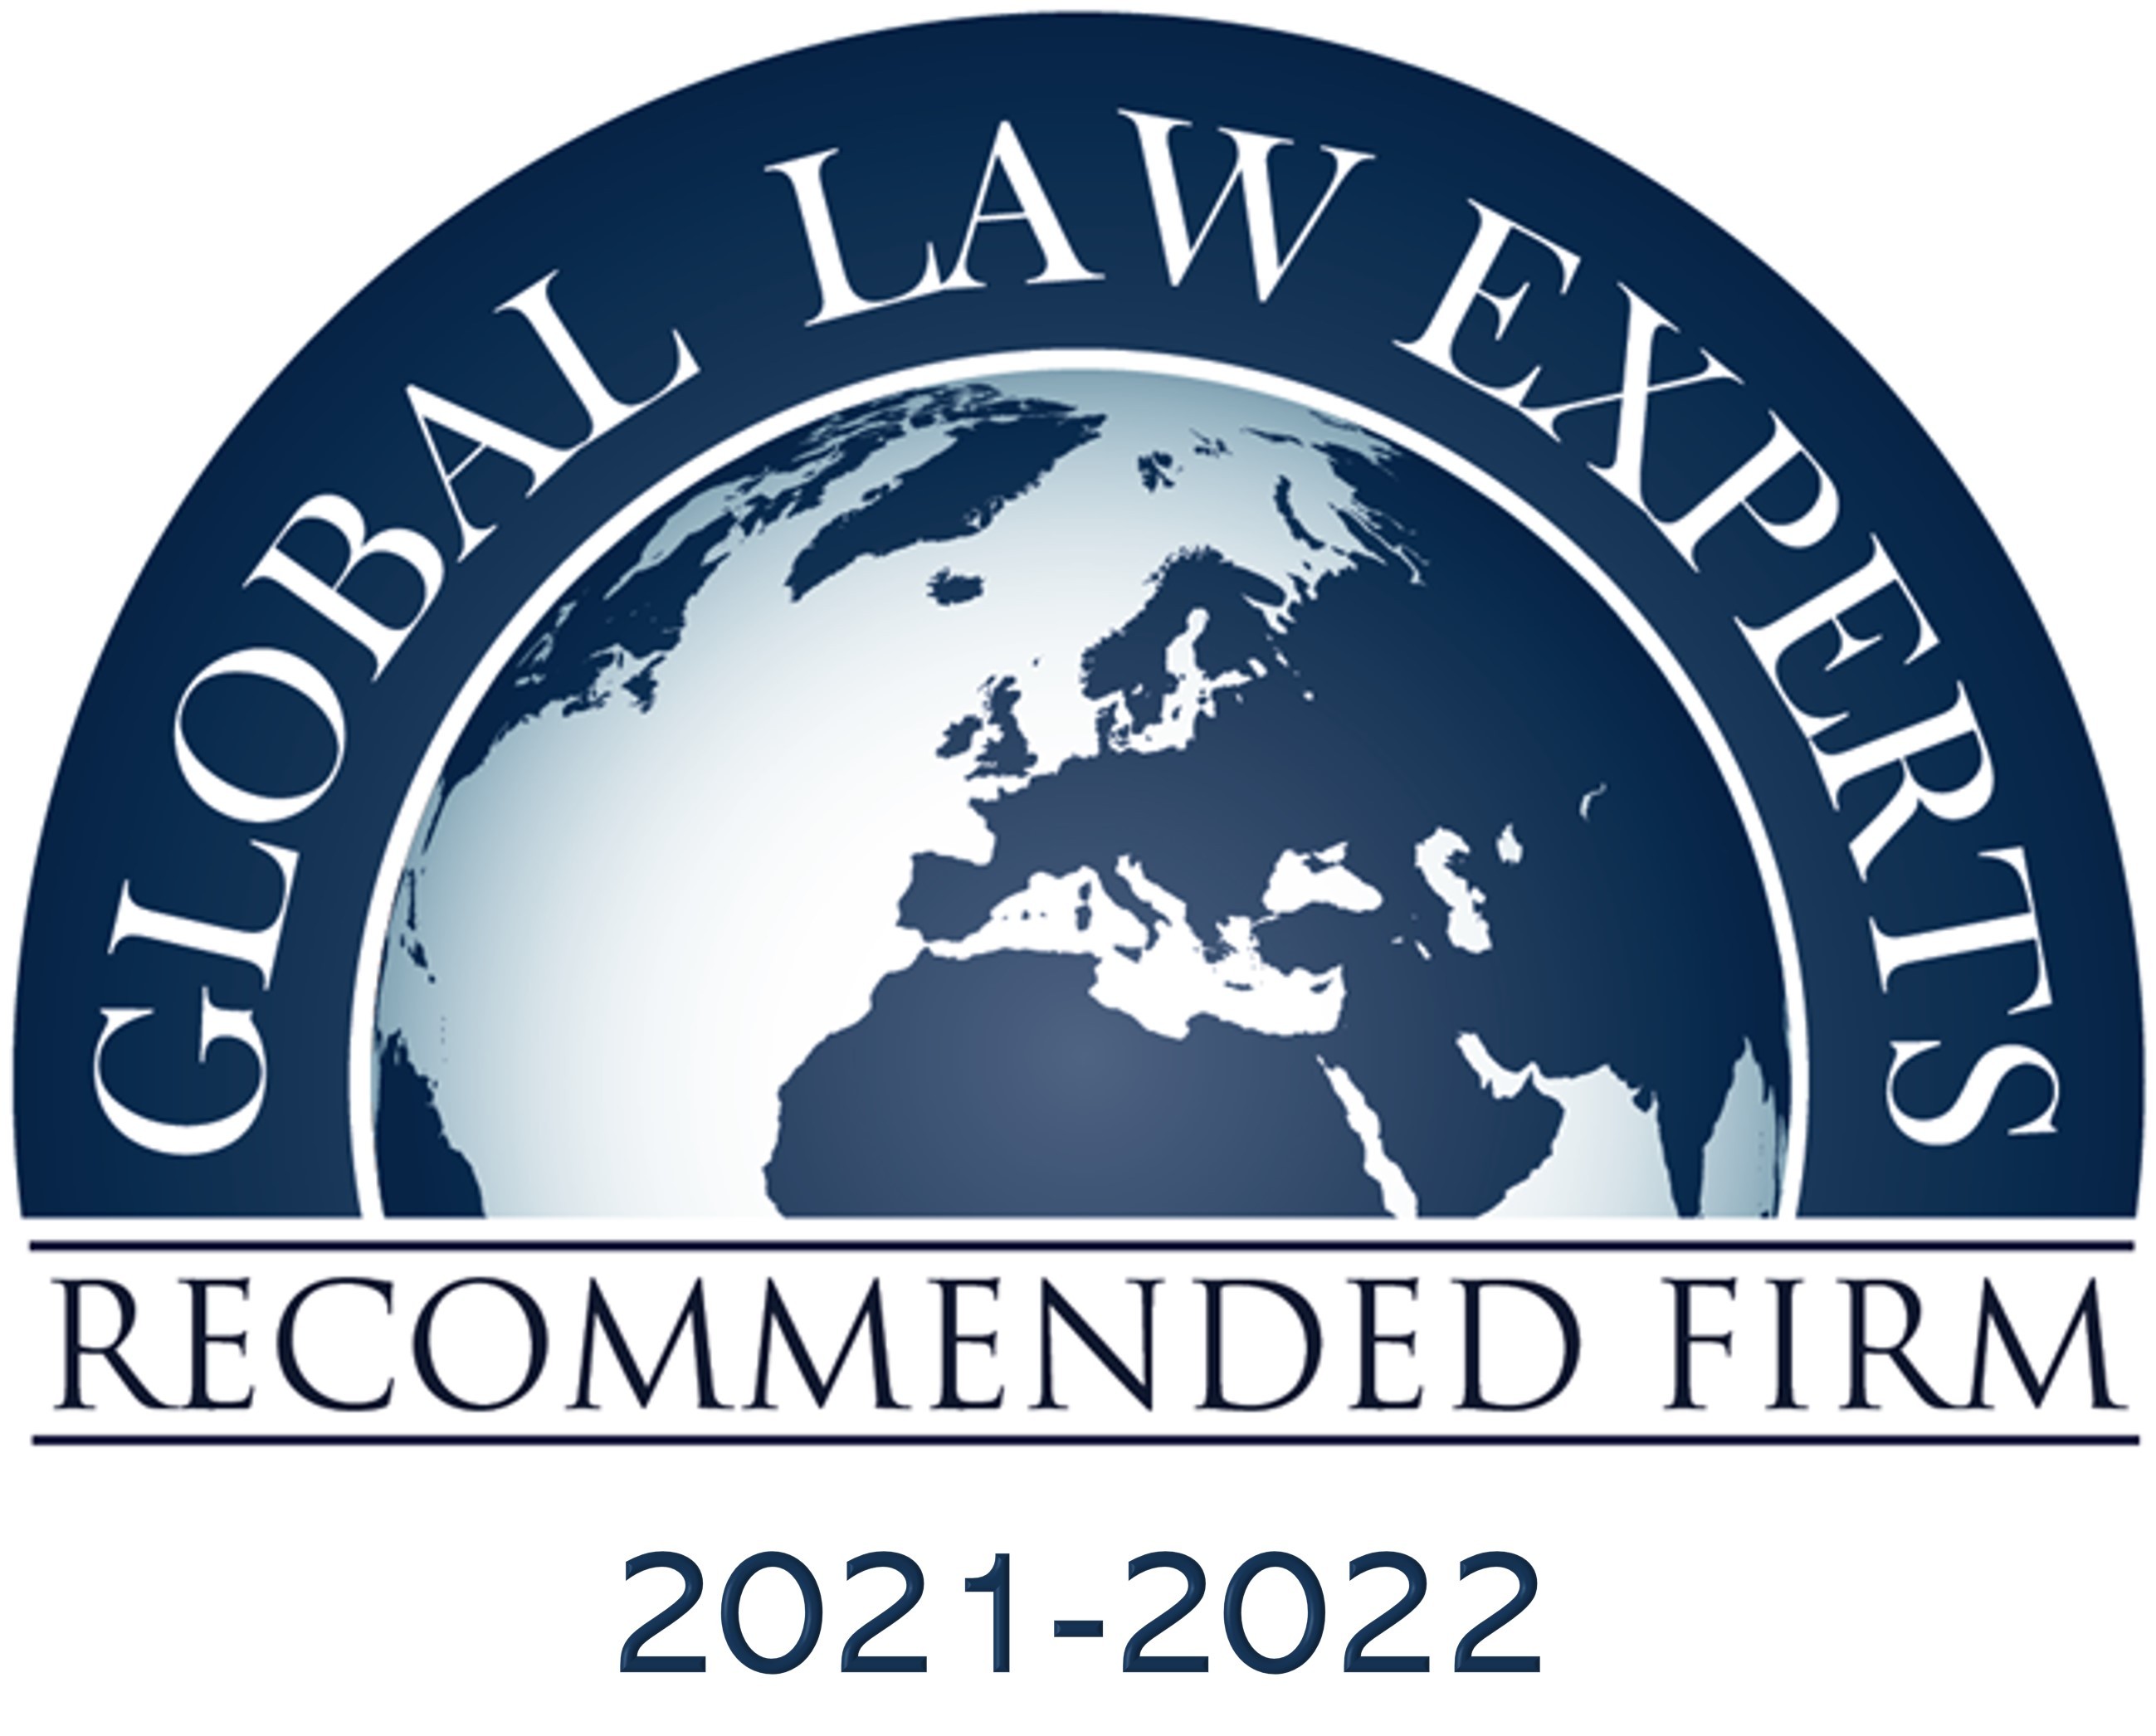 Named as an exclusive "Recommended M&A Firm" in Hong Kong by Global Law Experts (GLE) 2021/2022